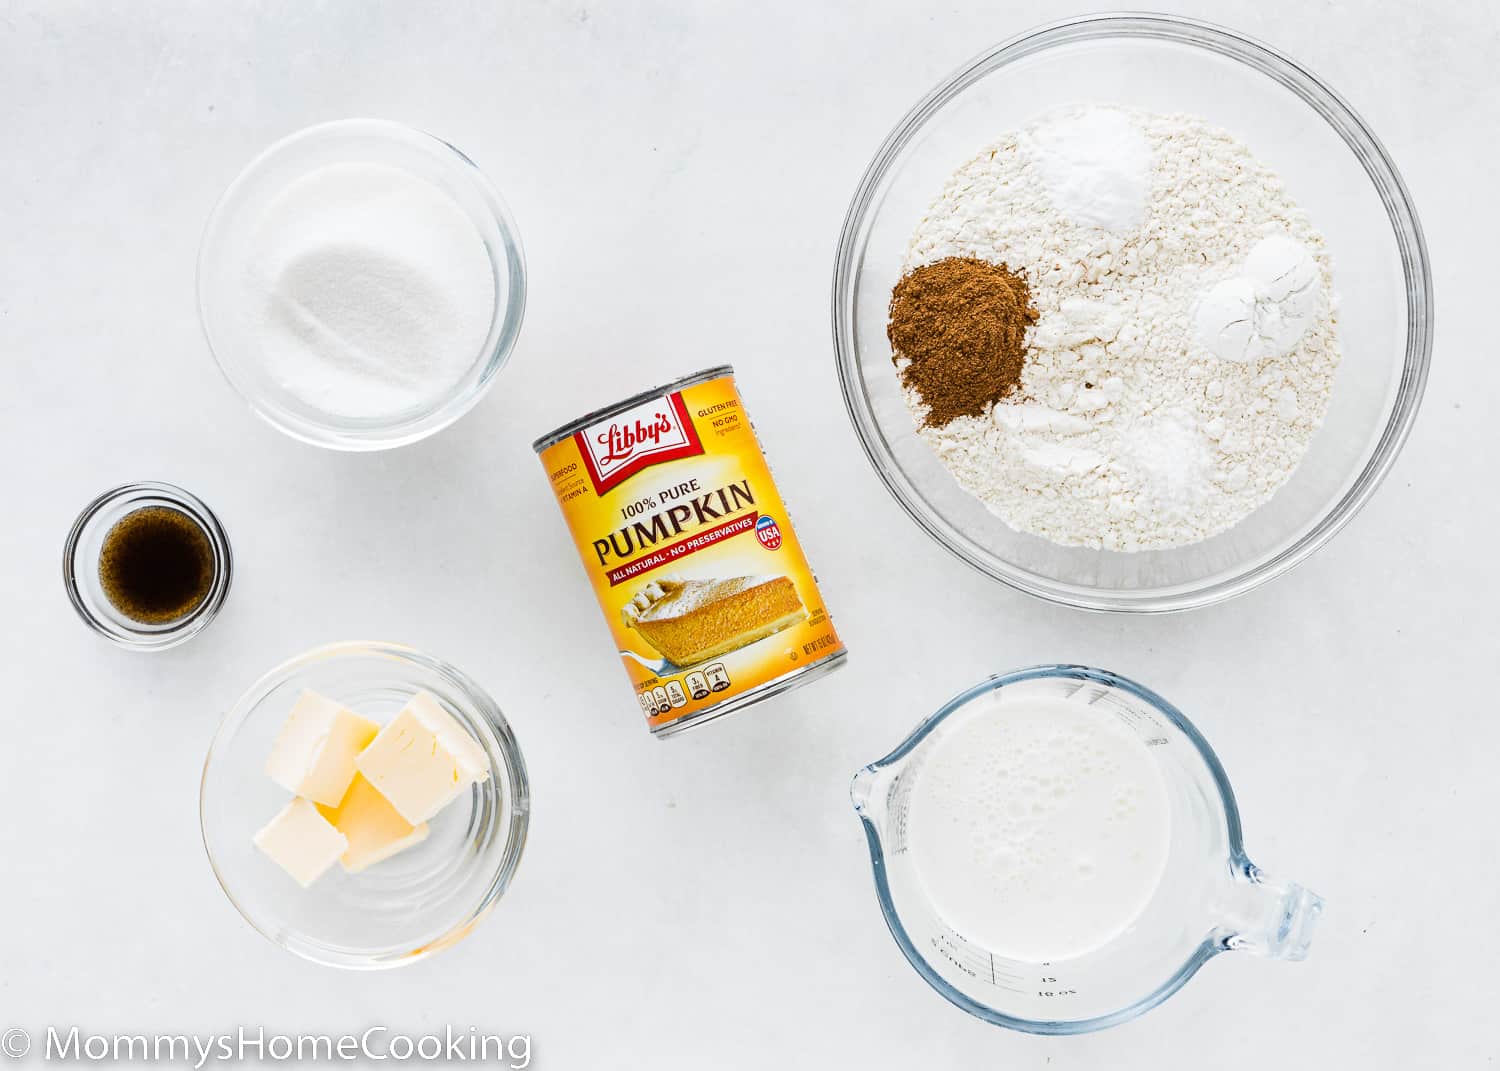 ingredients needed to make eggless pumpkin waffles over a white surface with tag names.